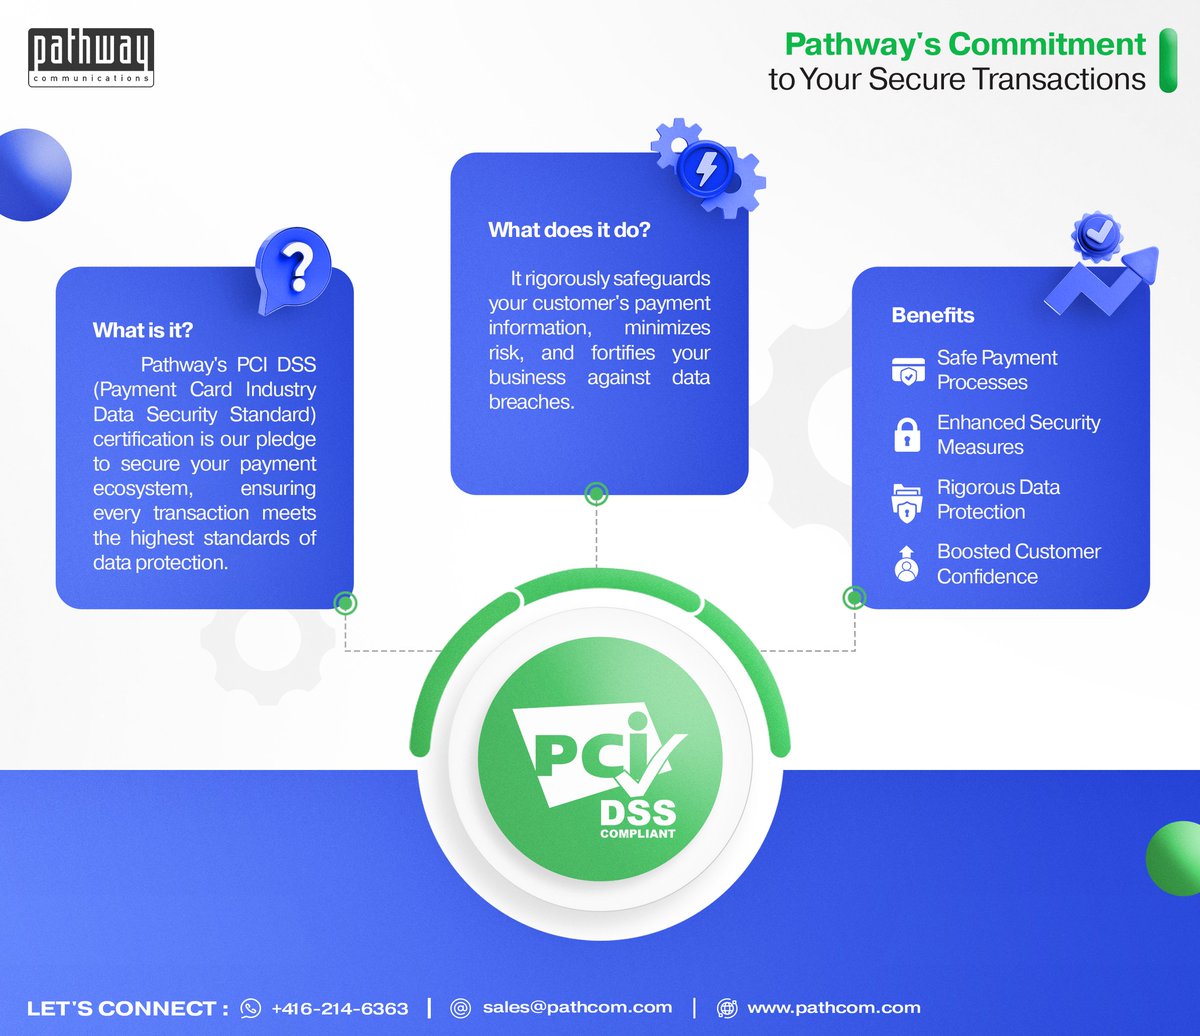 Maximize the trust in your transactions with Pathway. 
We're officially #PCIDSSCertified! 🛡️✅ 
Your payments are not just transactions; they're promises of security and reliability.

🔗pathcom.com
📞 416-214-6363
📧 sales@pathcom.com

#Pathway #PaymentSecurity